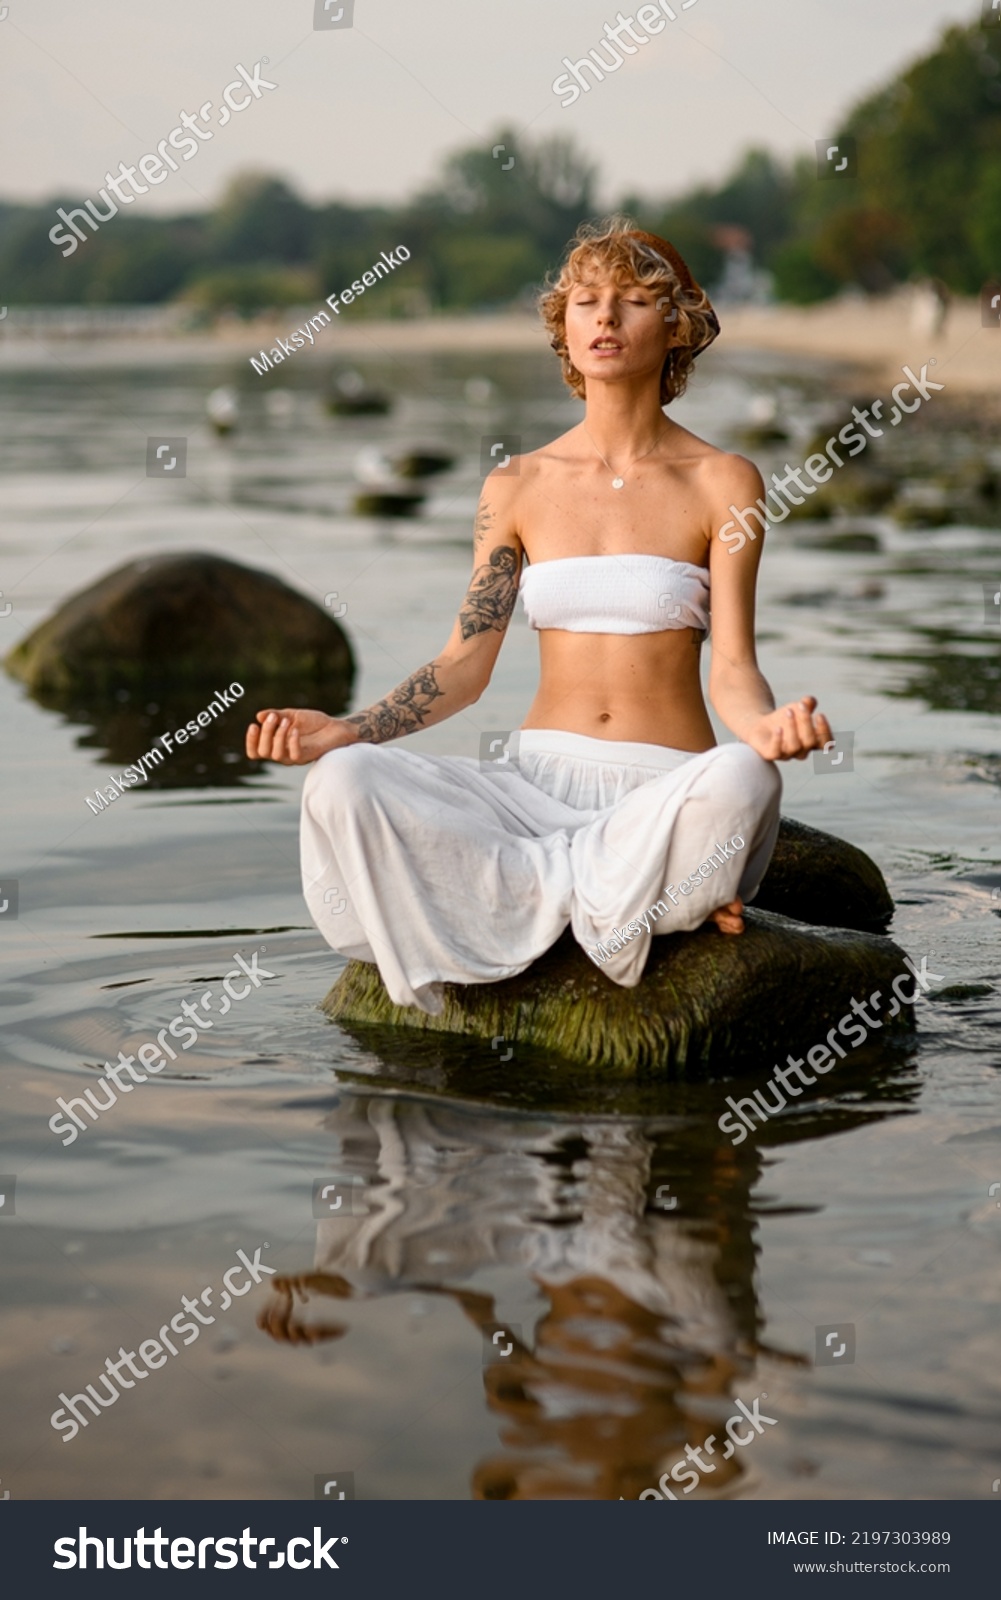 peaceful woman practices yoga position doing meditation in tranquil outdoor sitting on stone in water. Mental wellbeing healthy lifestyle. #2197303989